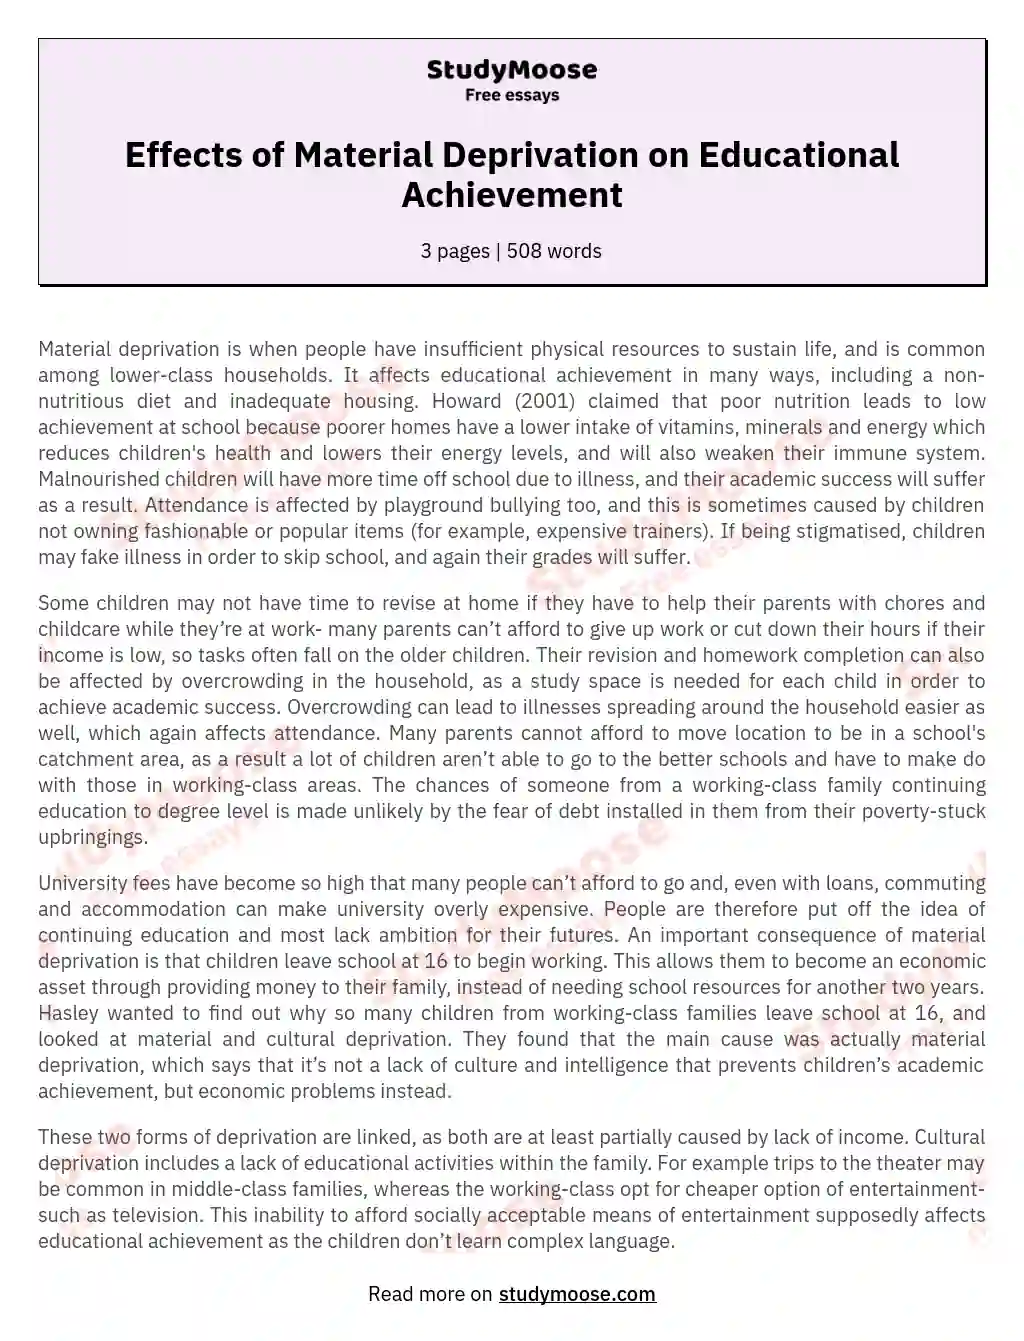 Outline some of the ways in which material deprivation may affect educational achievement